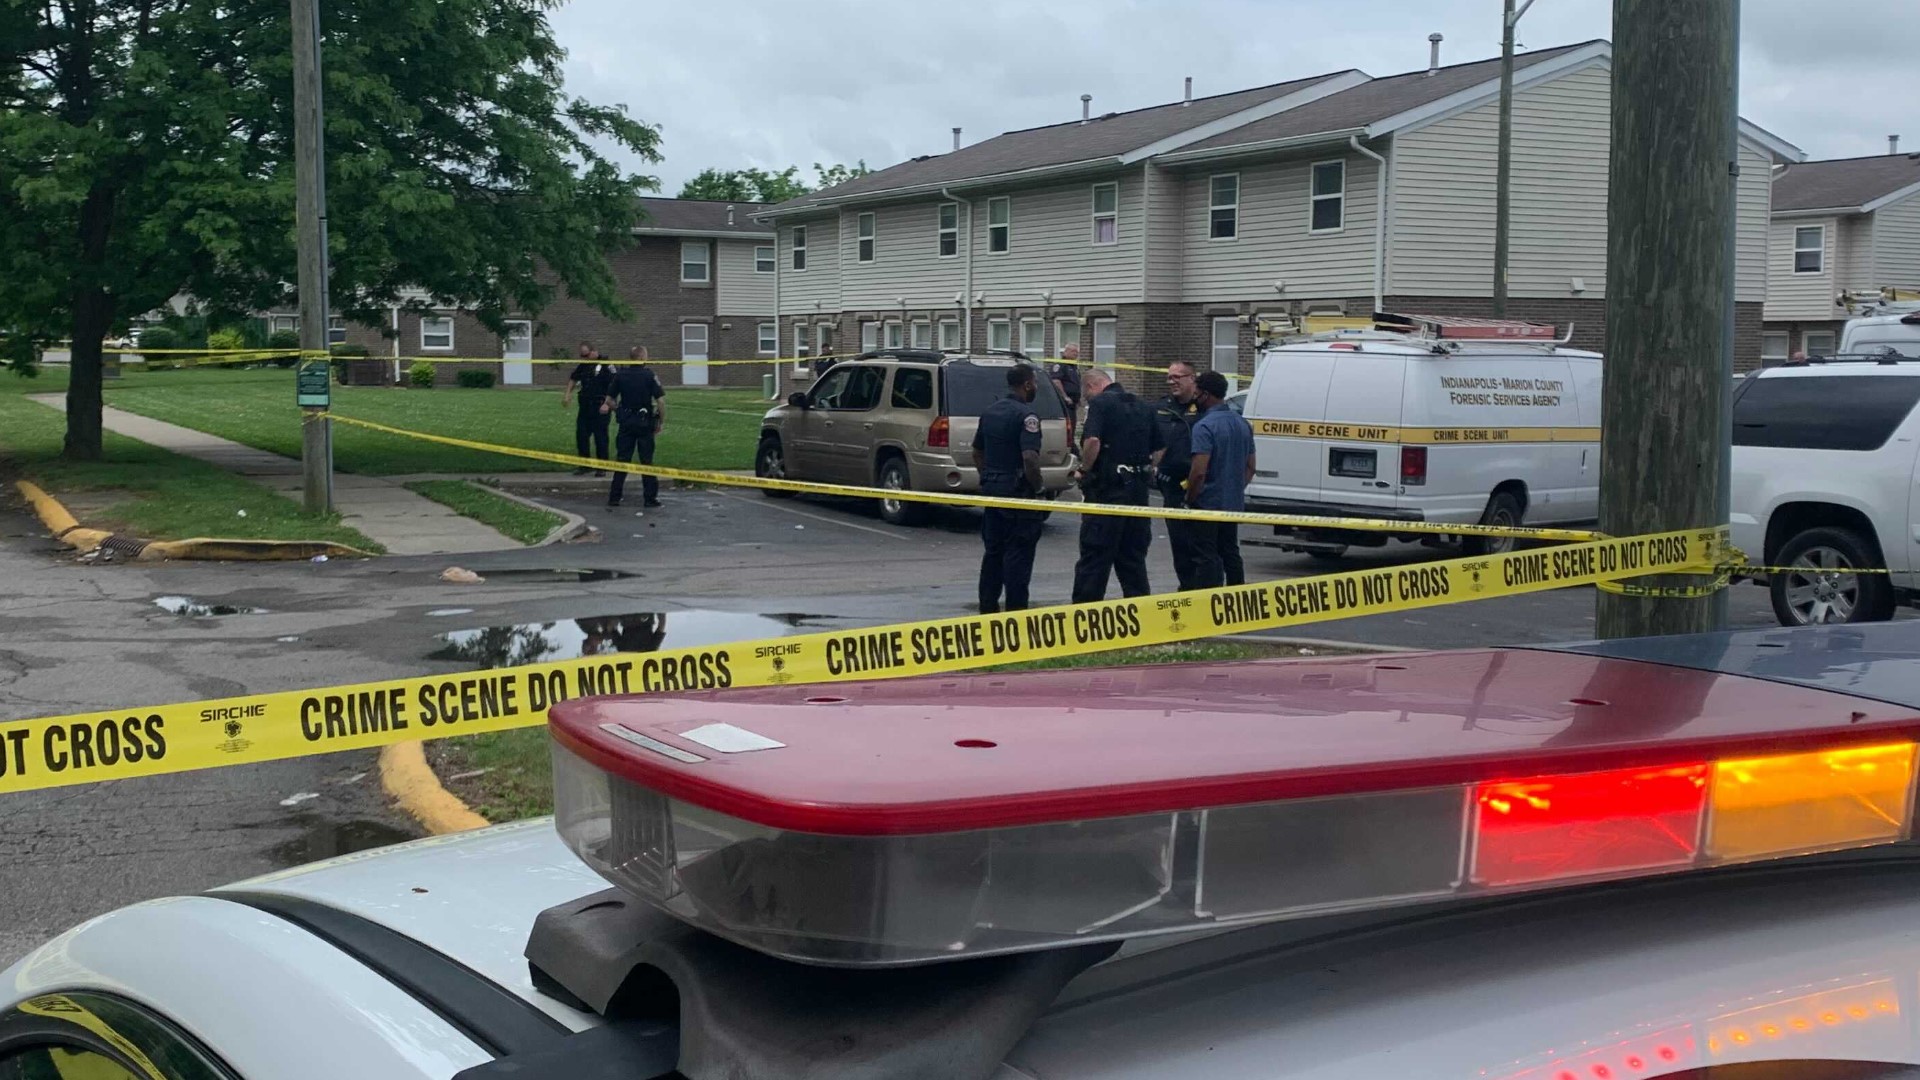 A man was shot and killed in the 2900 block of Priscilla Avenue, and officers found another man nearby at the vacant Arlington Middle School who had also been shot.